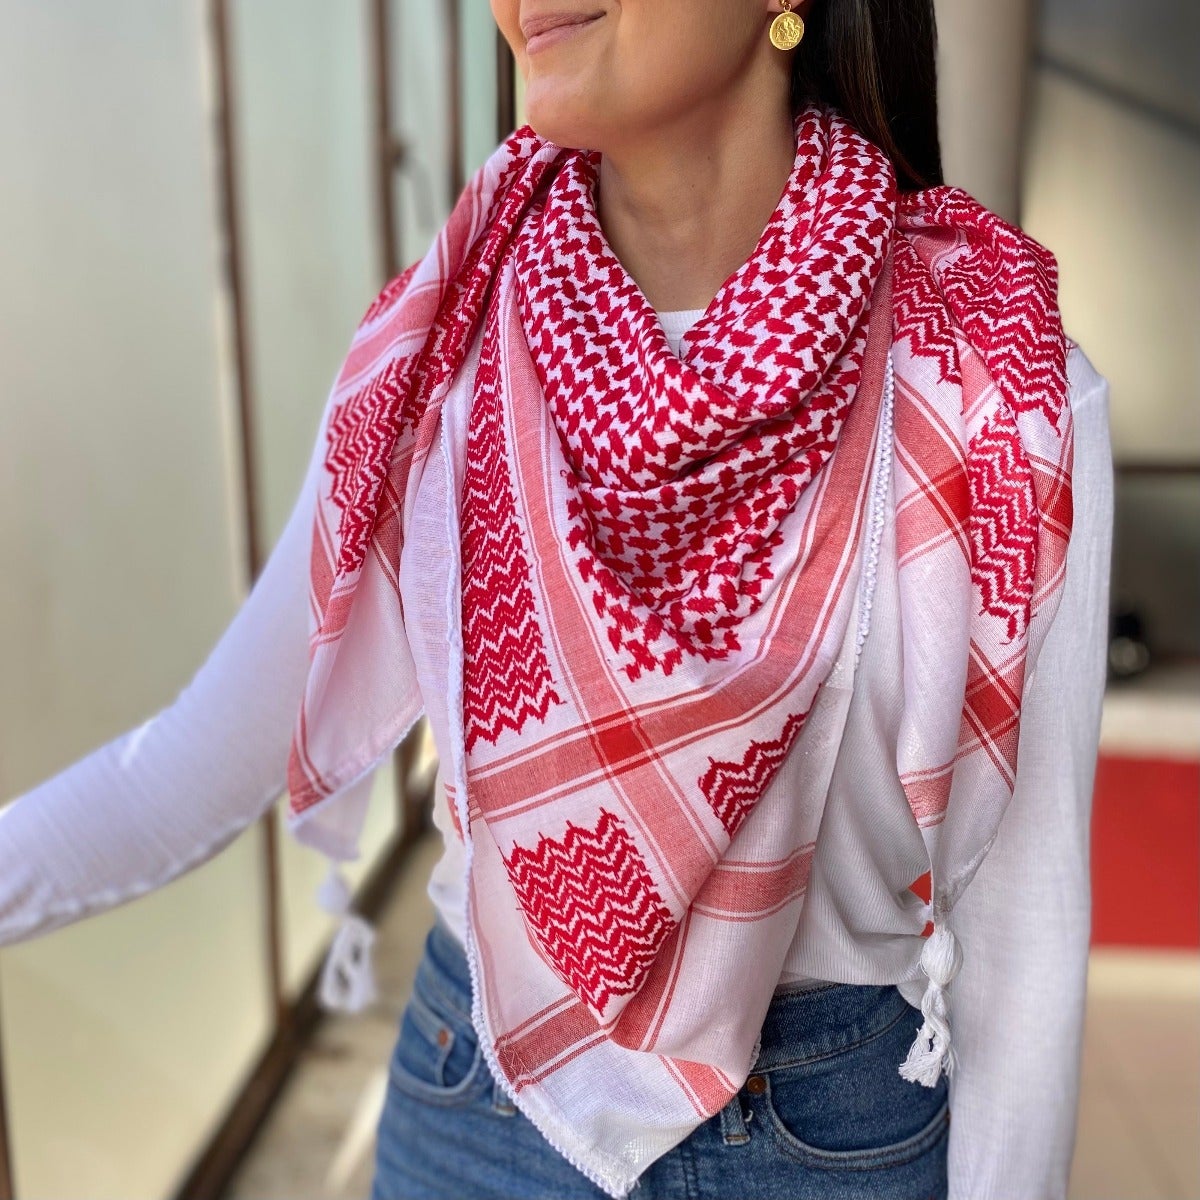 Palestinian keffiyeh, checkered black and white scarf, with